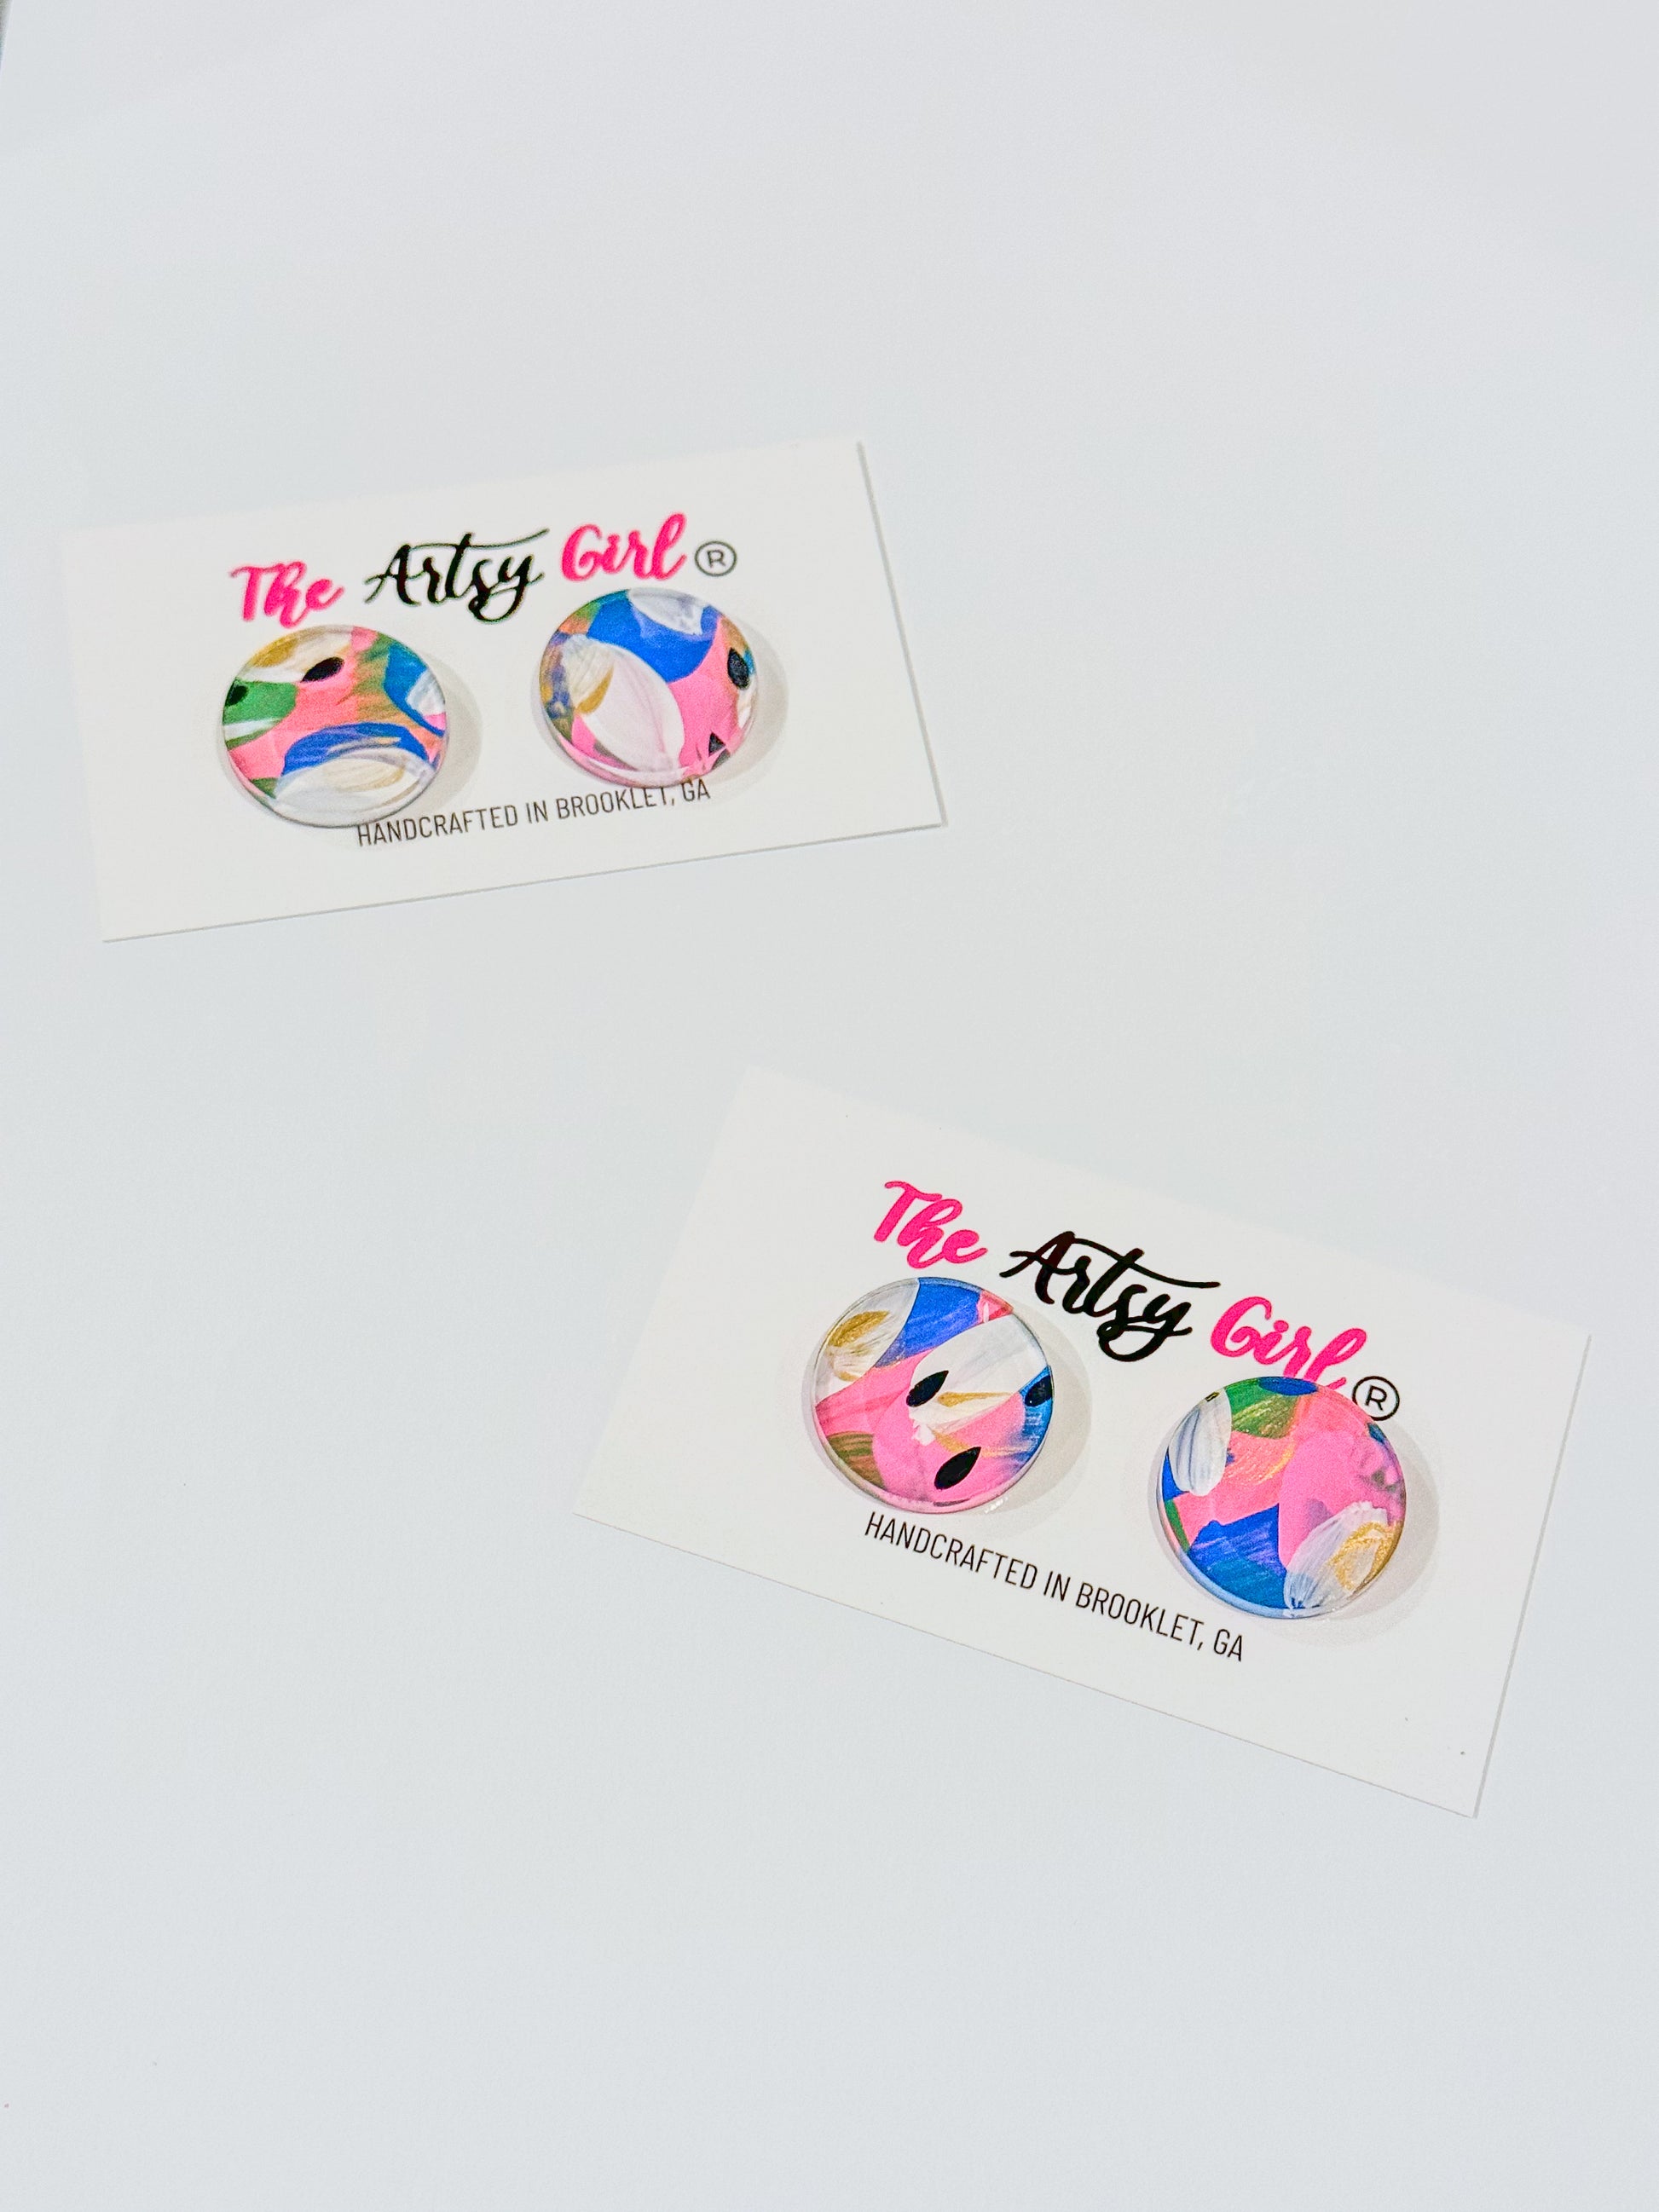 The Big Sparkles hand-painted stud earrings, blending simplicity and sophistication with delicate brush strokes, adding color and charm to any outfit. Perfect for special occasions or everyday style.